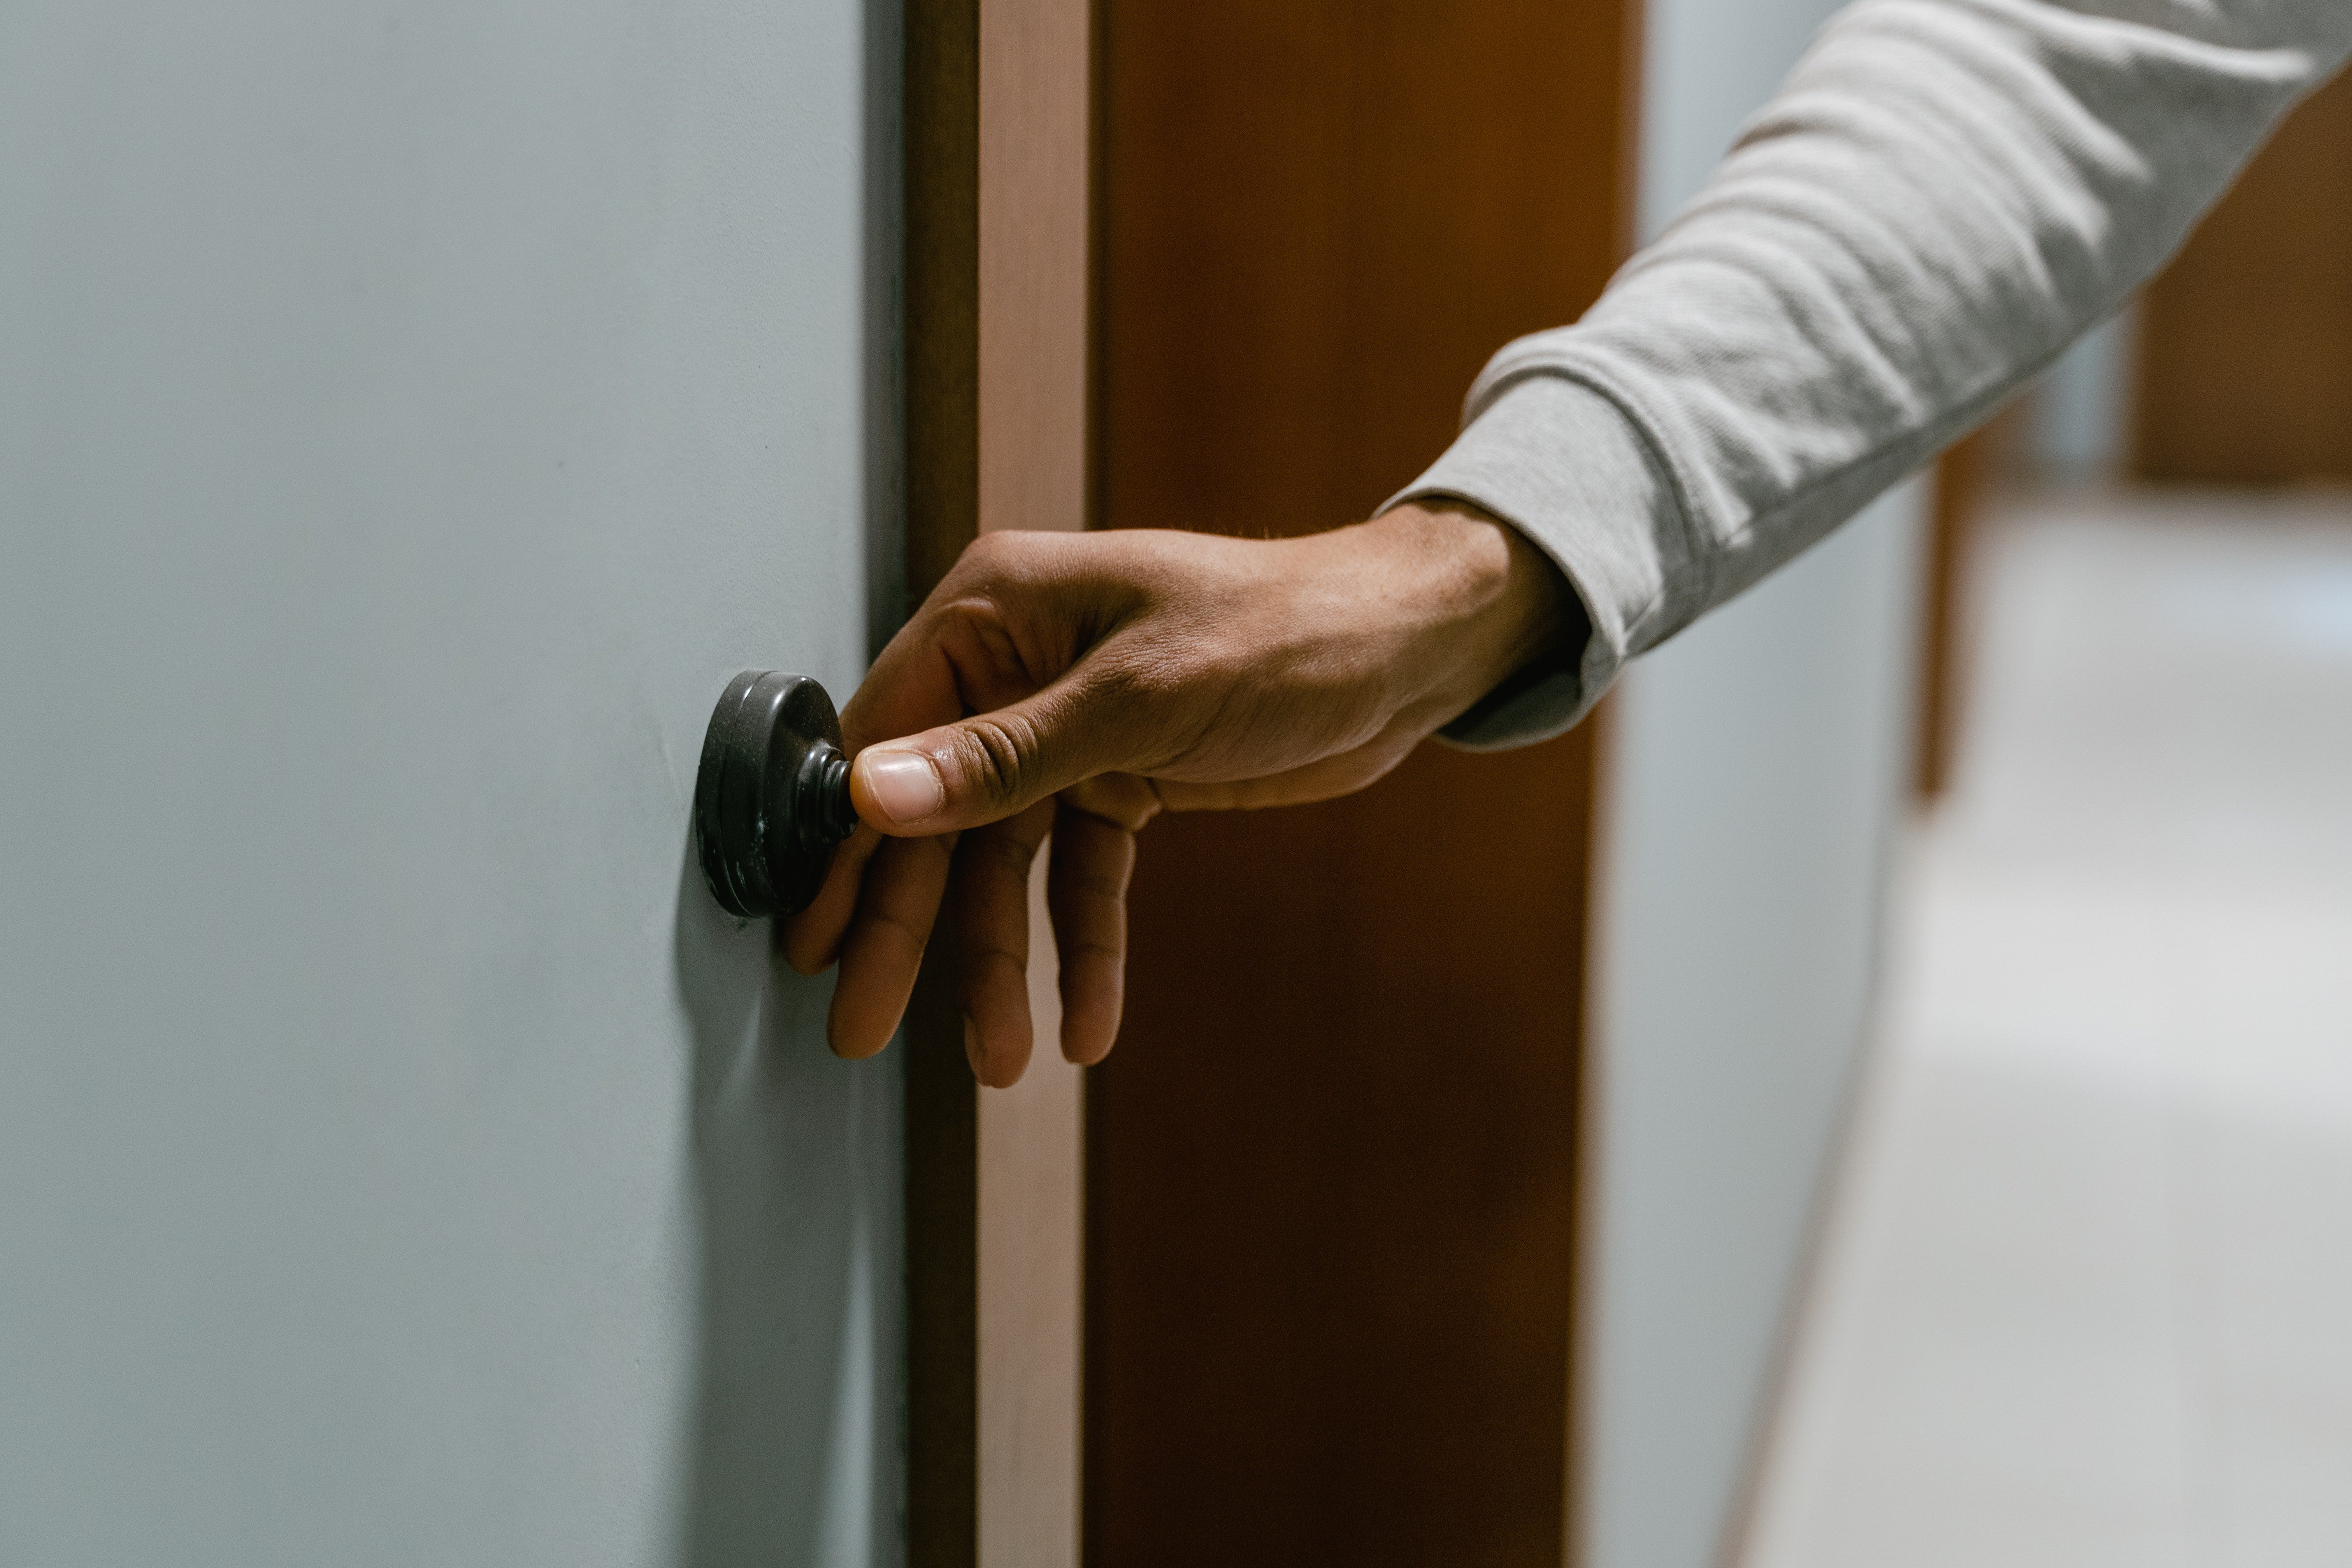 On an early morning, OP heard someone ring her doorbell | Photo: Pexels